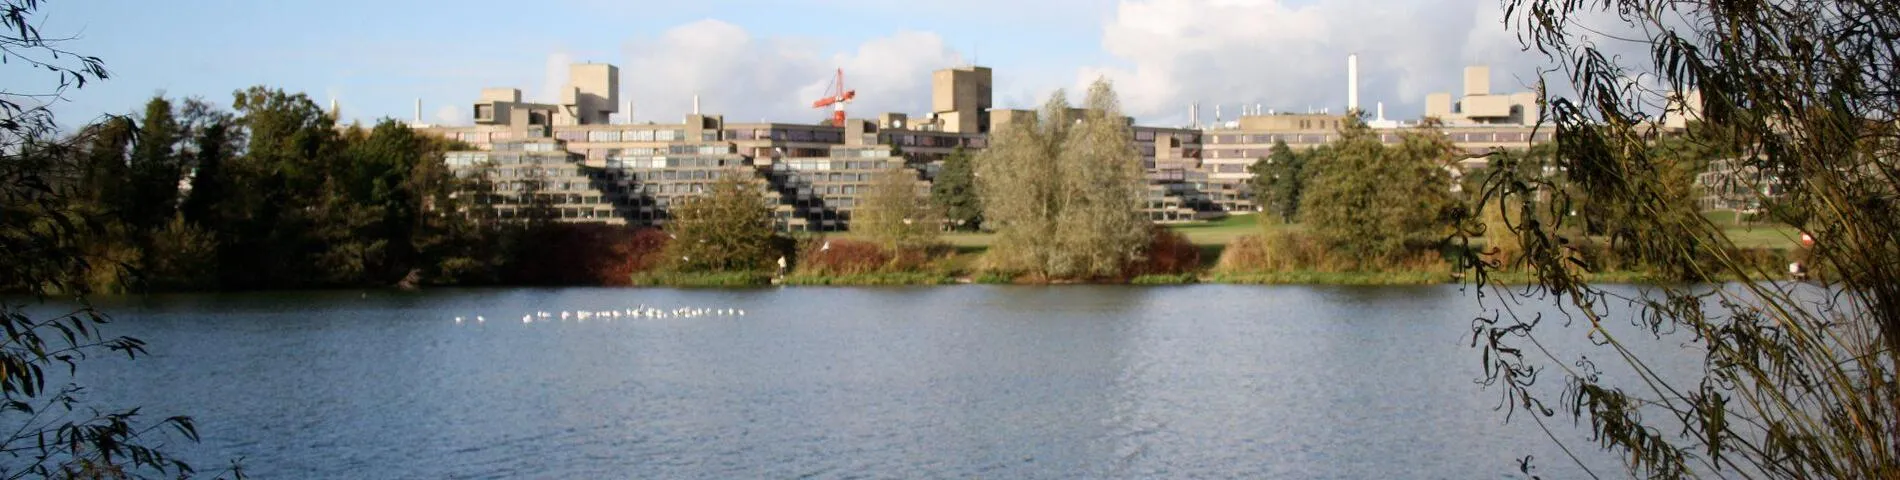 University of East Anglia picture 1